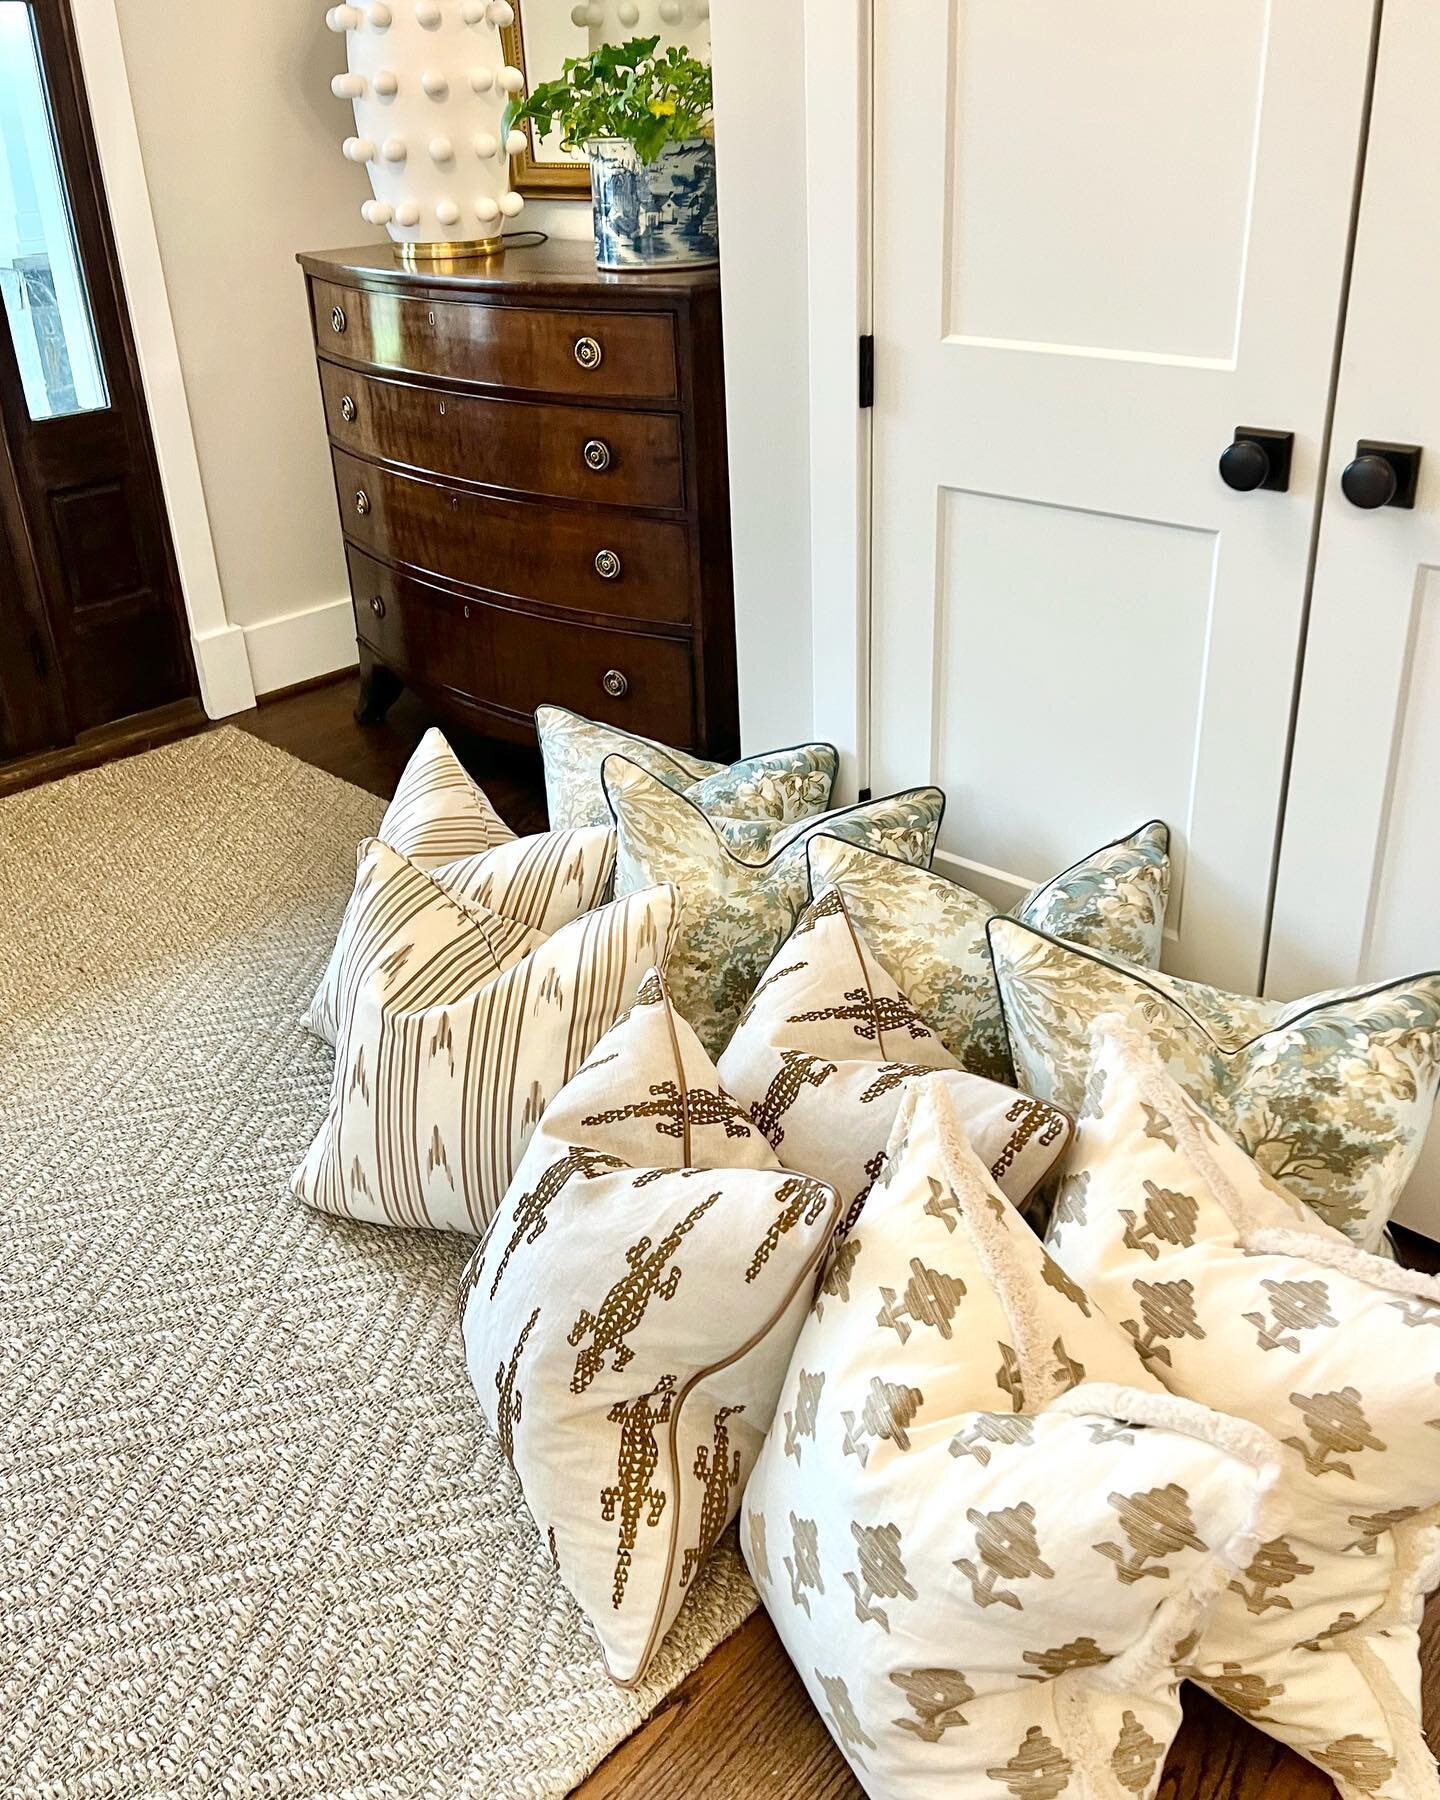 Pillow heaven! ☁️✨There is nothing better than a design delivery! They have arrived and I&rsquo;m so excited to see this special family room come to life before the holidays! 🤍 that they love the details as much as I do: embroidery, leather trim, fr